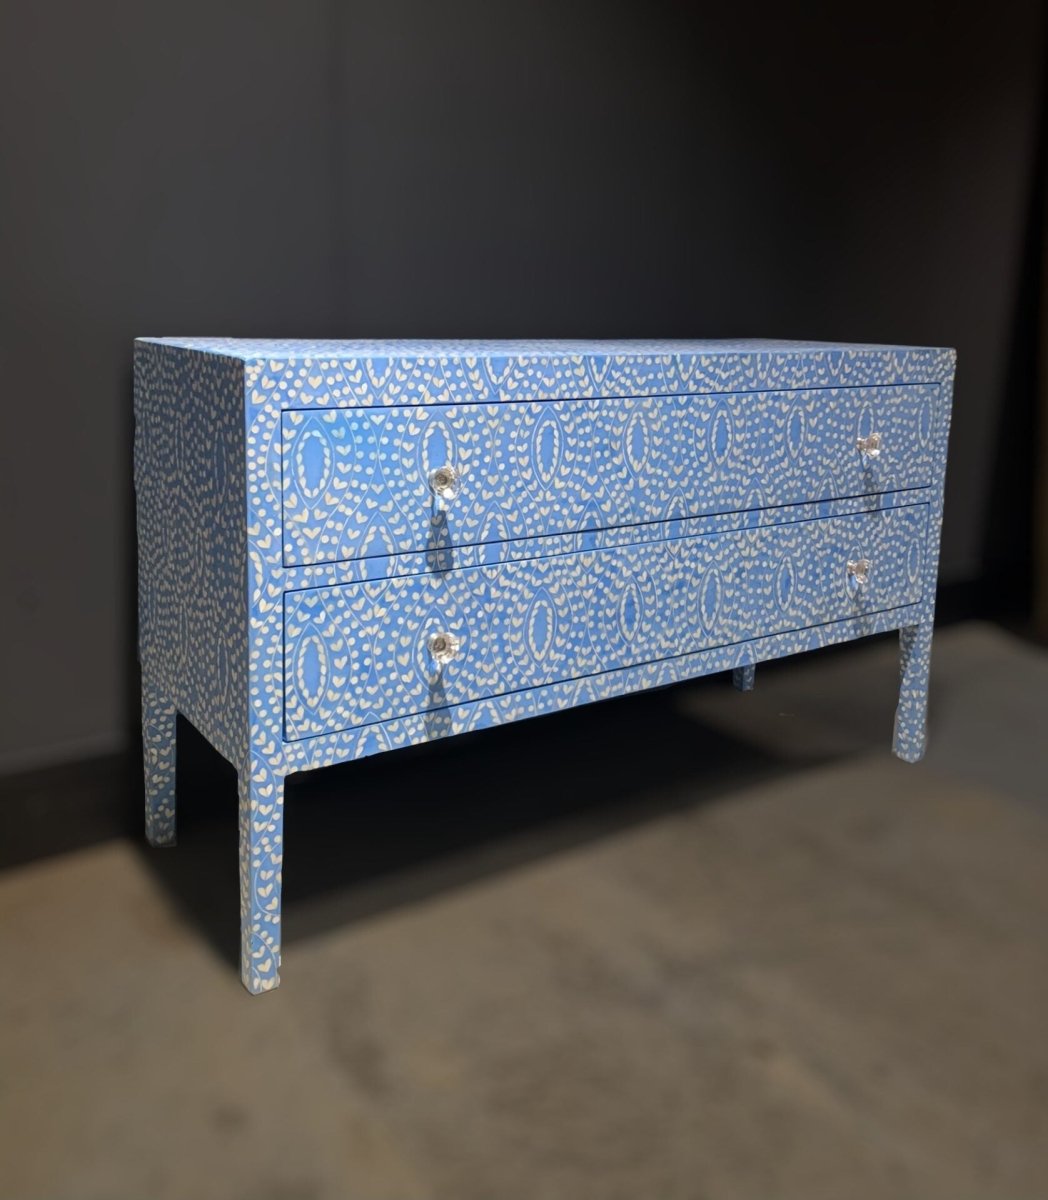 Handmade Bone Inlay Chest Of Drawers | Hand Crafted Indian Dresser in Blue Color Chest of Drawers - Bone Inlay Furnitures